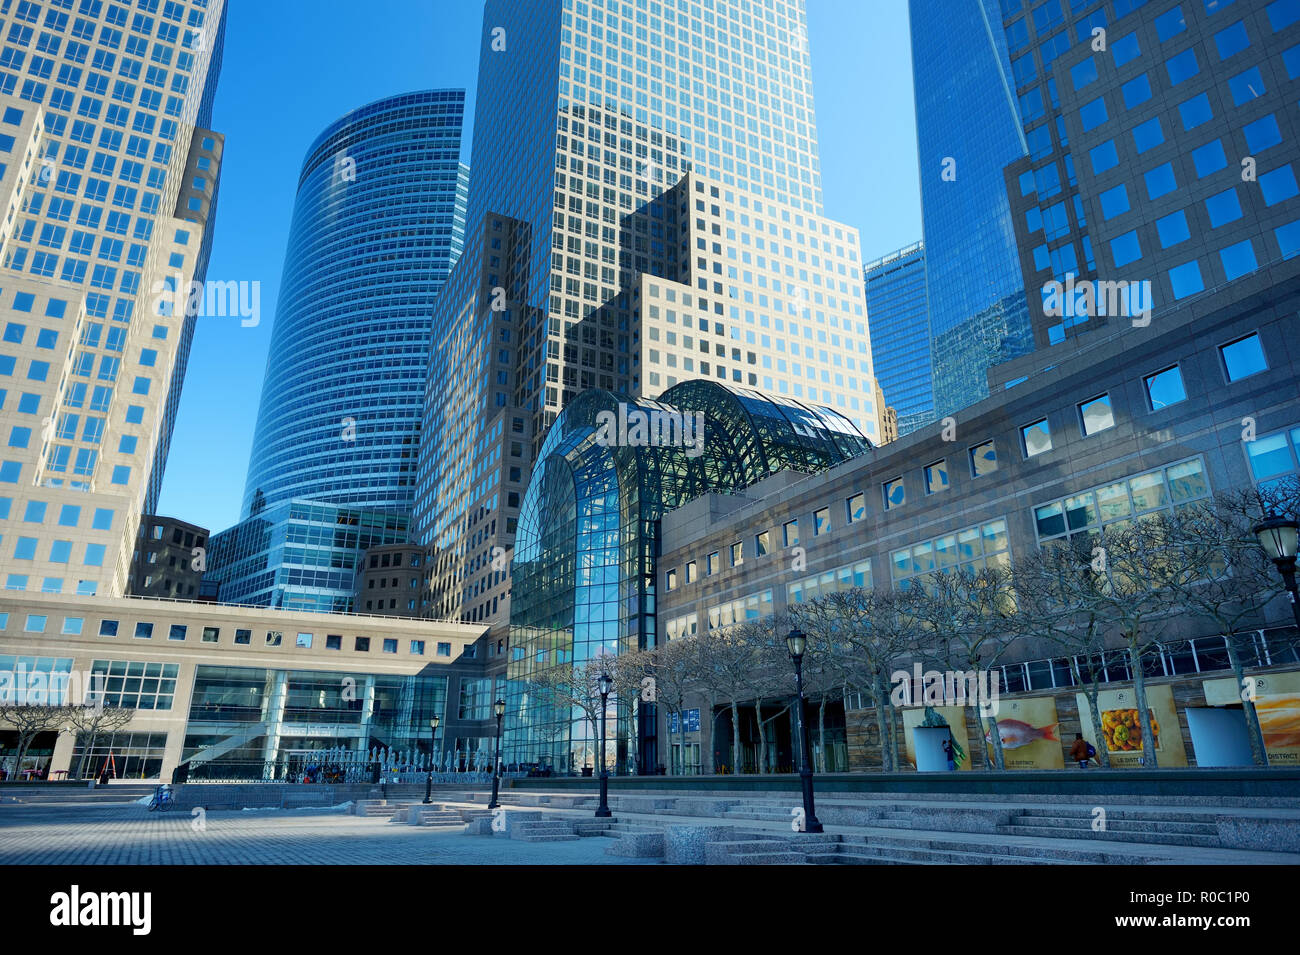 NEW YORK - MARCH 22, 2015: Brookfield Place, still referred to as the World Financial Center, located in the Battery Park City neighborhood of Manhatt Stock Photo